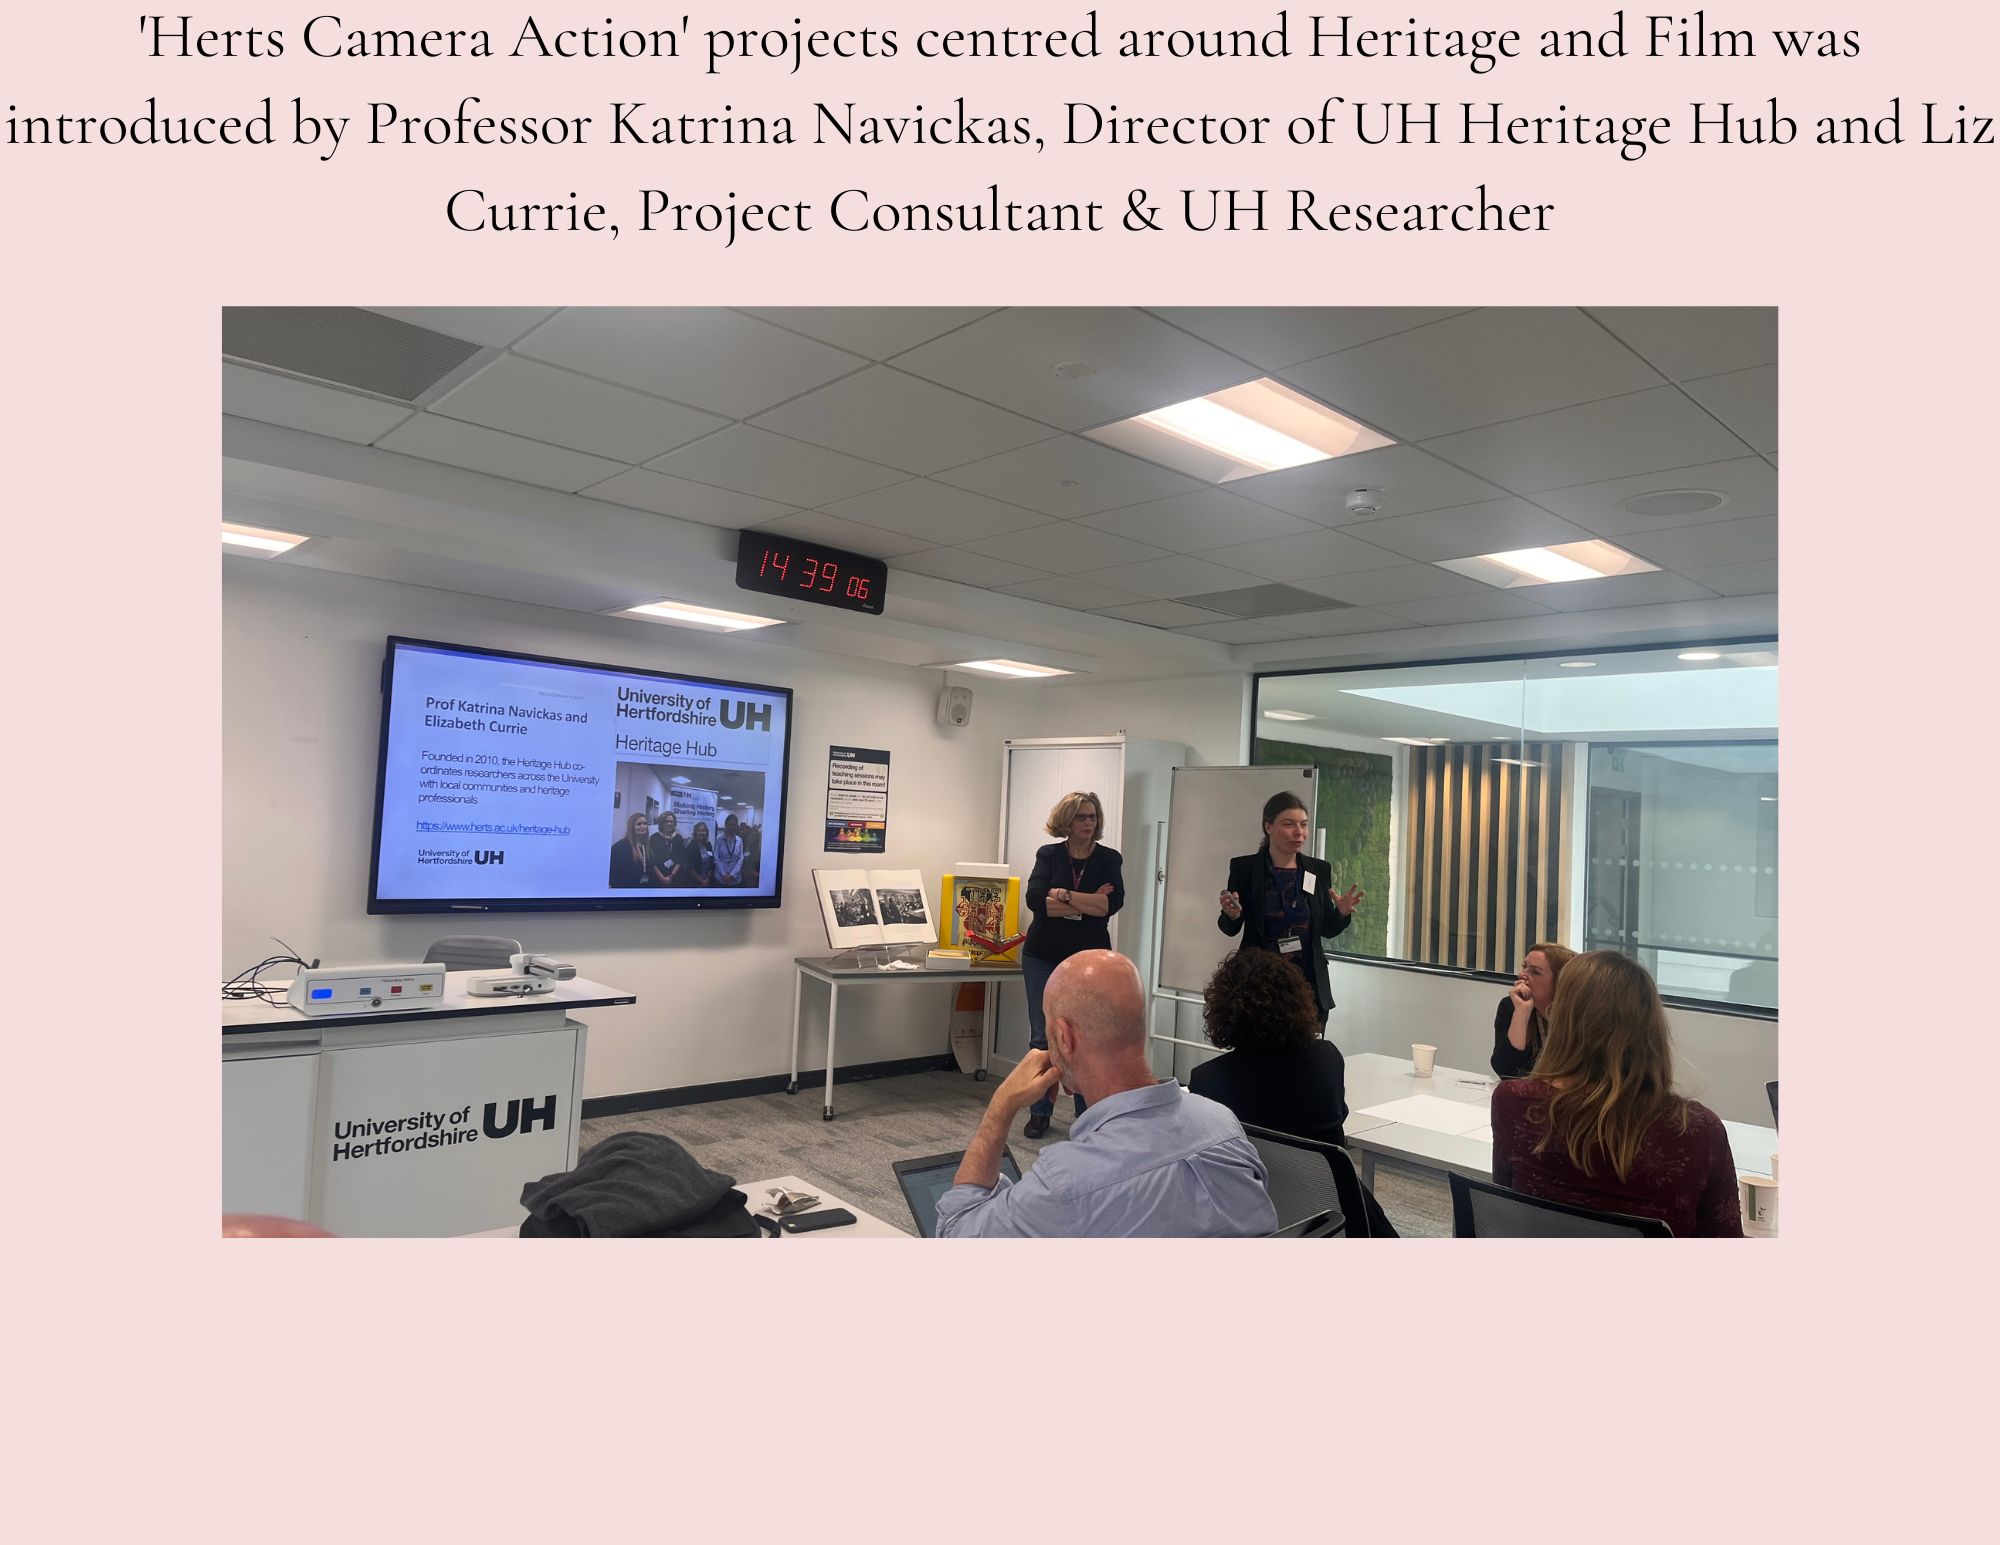 Katrina Navickas and Liz Currie speaking to the Film heritage event